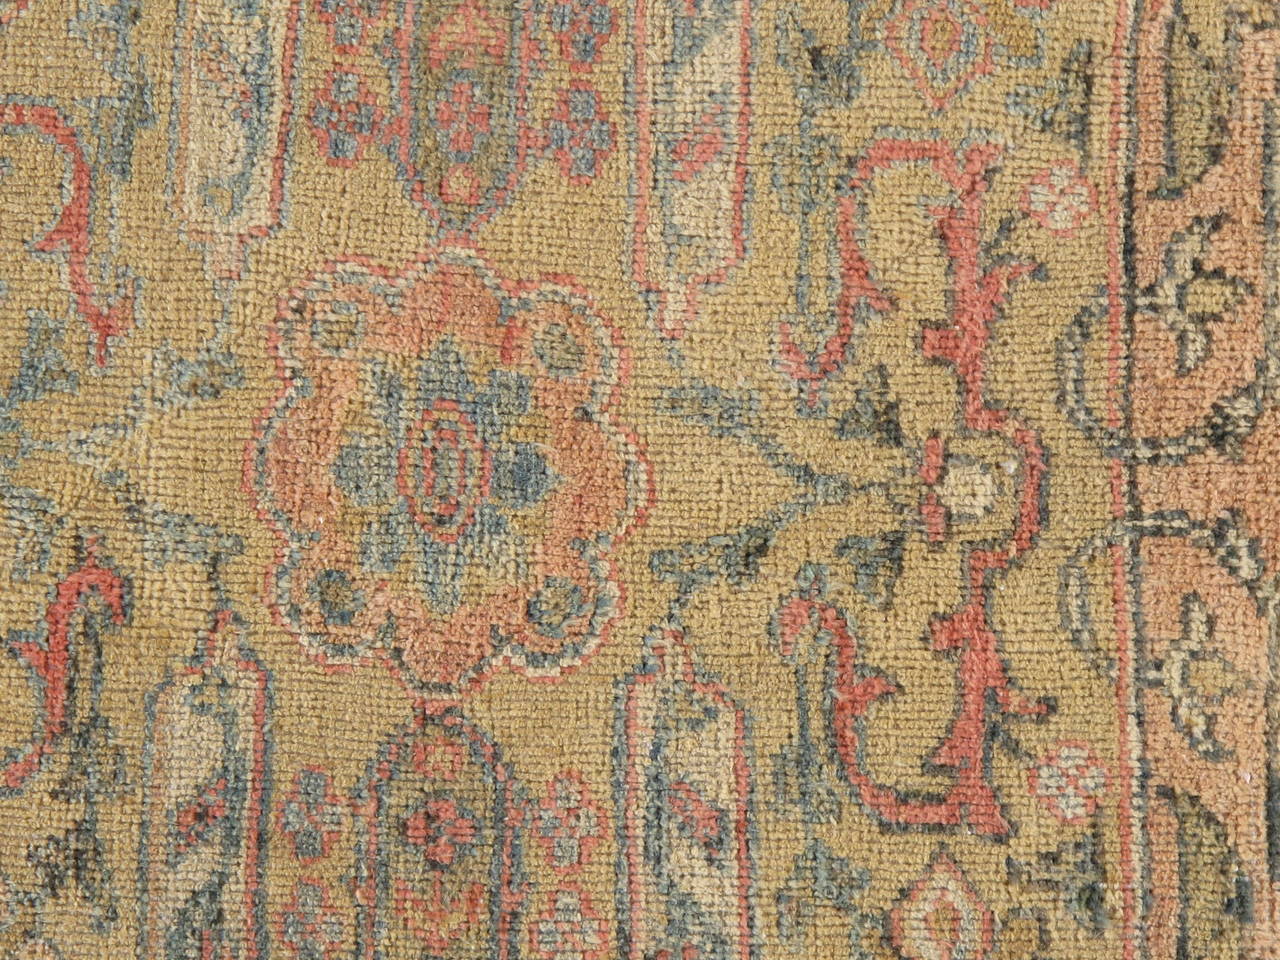 Finely woven antique Sultanabad carpet. Gorgeous color, great design. True one-of-a-kind.